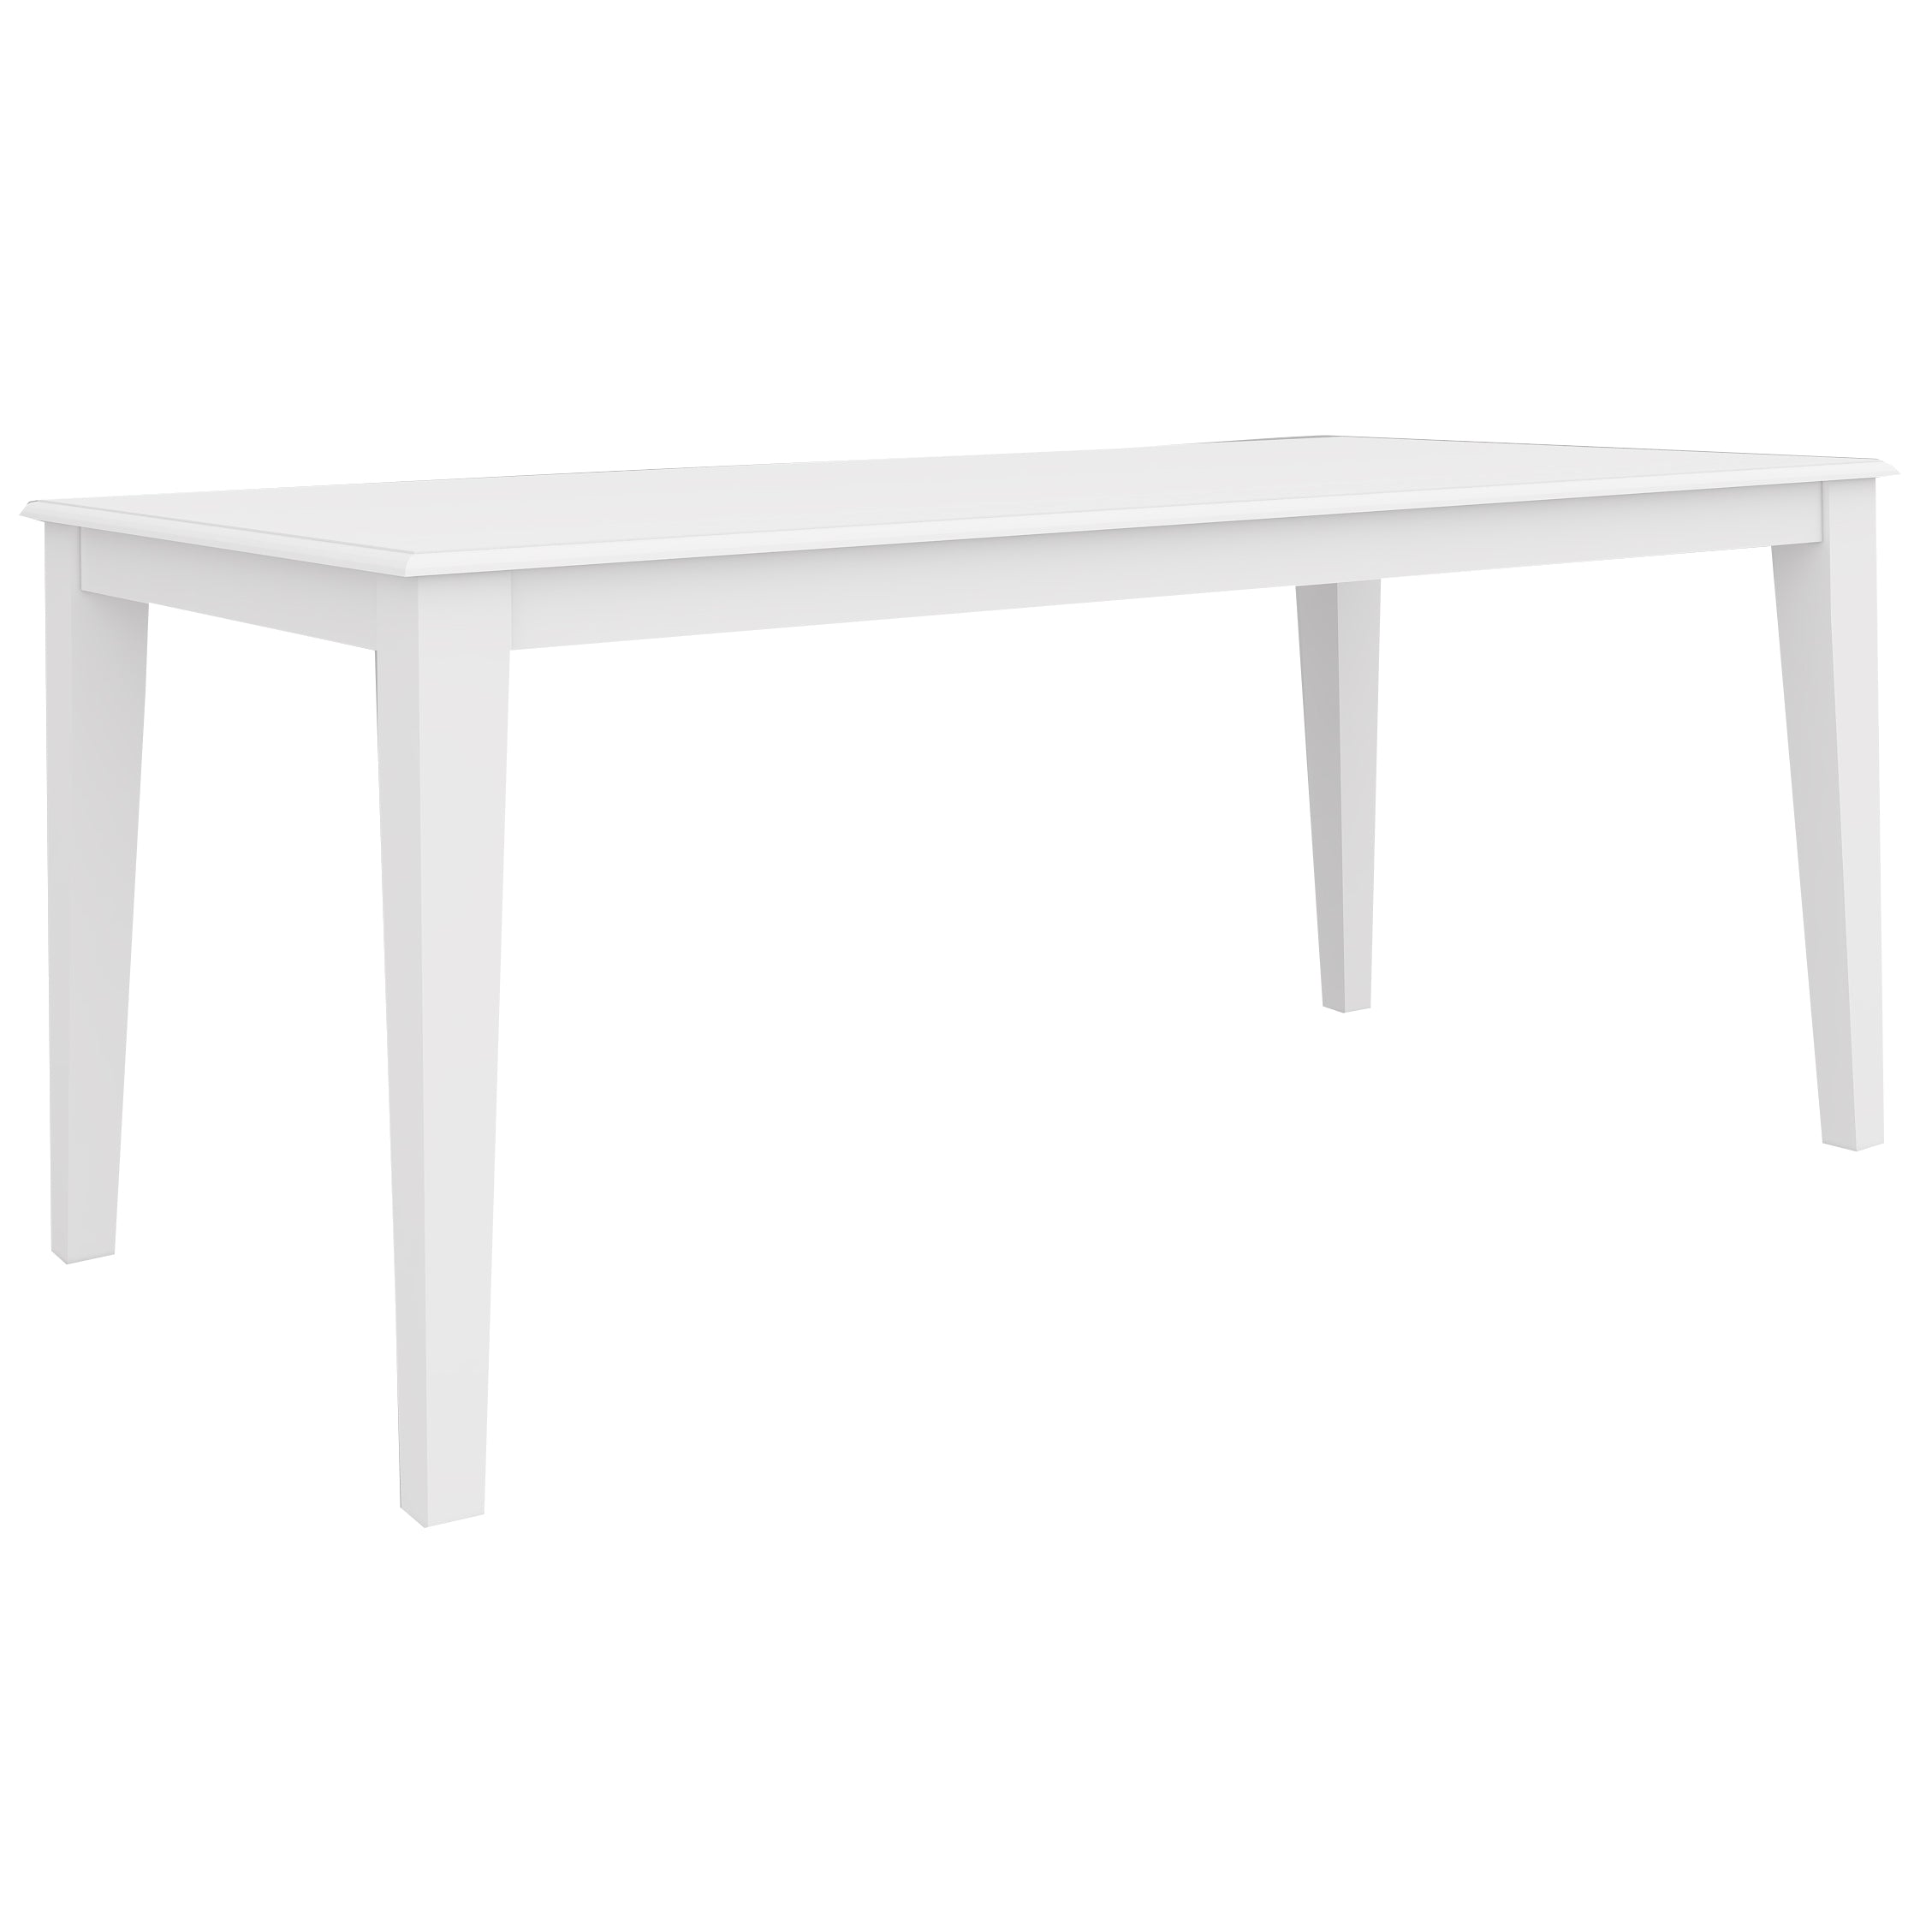 daisy-dining-table-180cm-solid-acacia-timber-wood-hampton-furniture-white